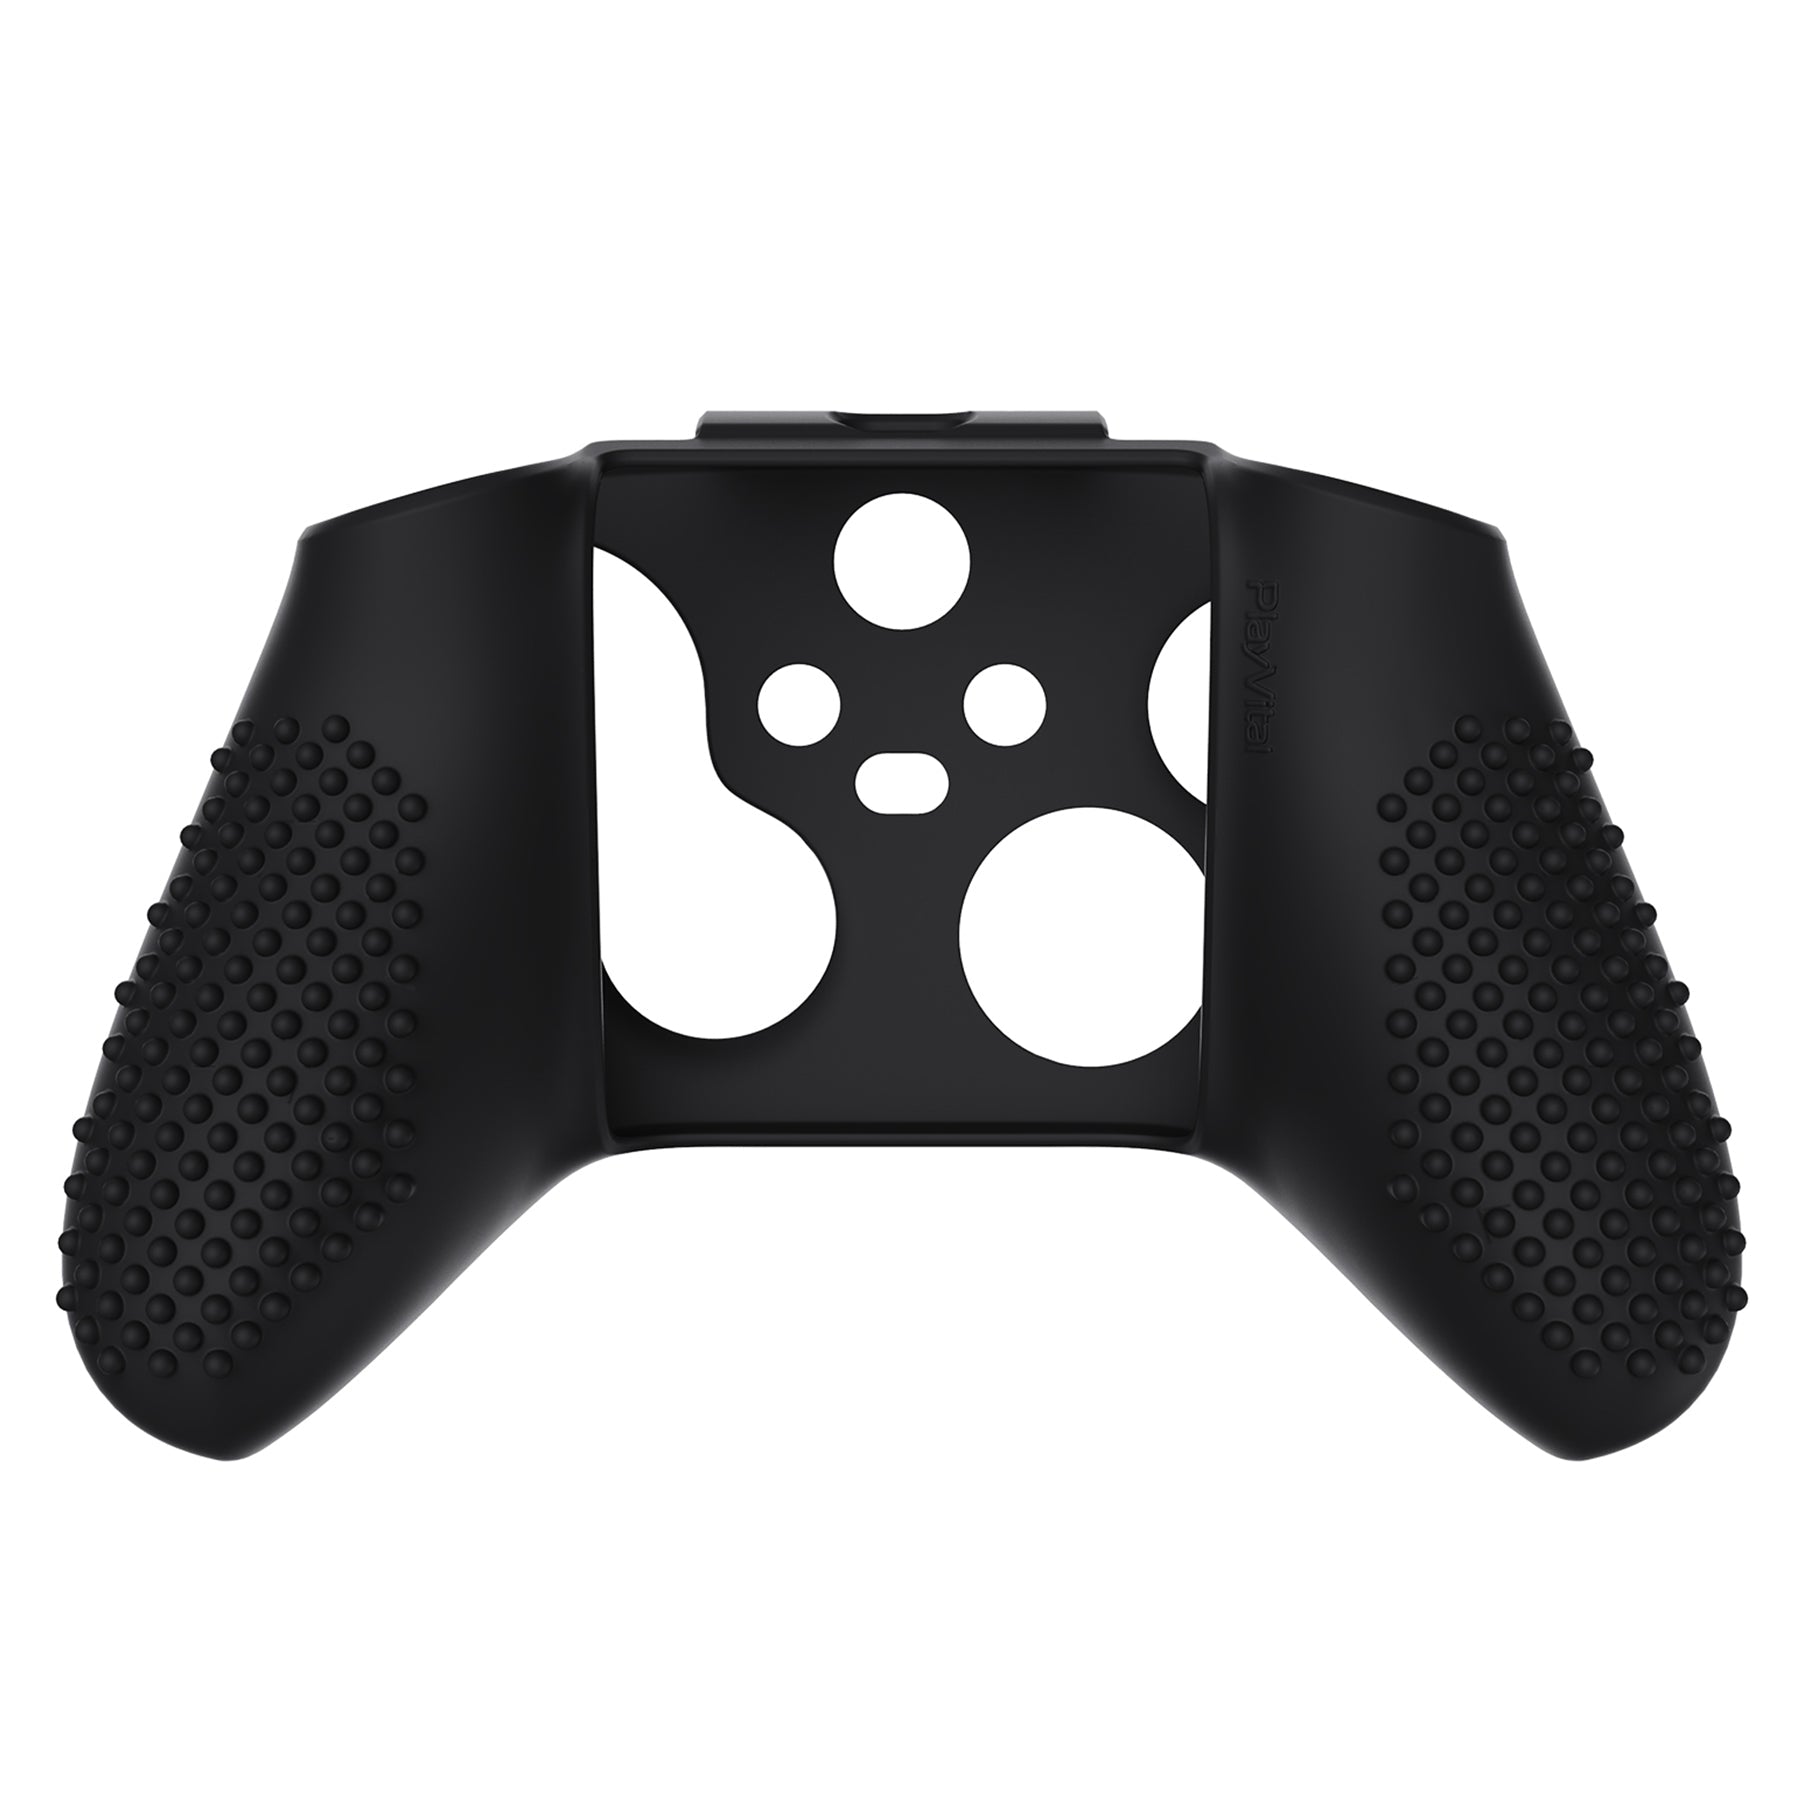 PlayVital Black 3D Studded Edition Anti-slip Silicone Cover Skin for Xbox Series X Controller, Soft Rubber Case Protector for Xbox Series S Controller with 6 Black Thumb Grip Caps - SDX3001 PlayVital